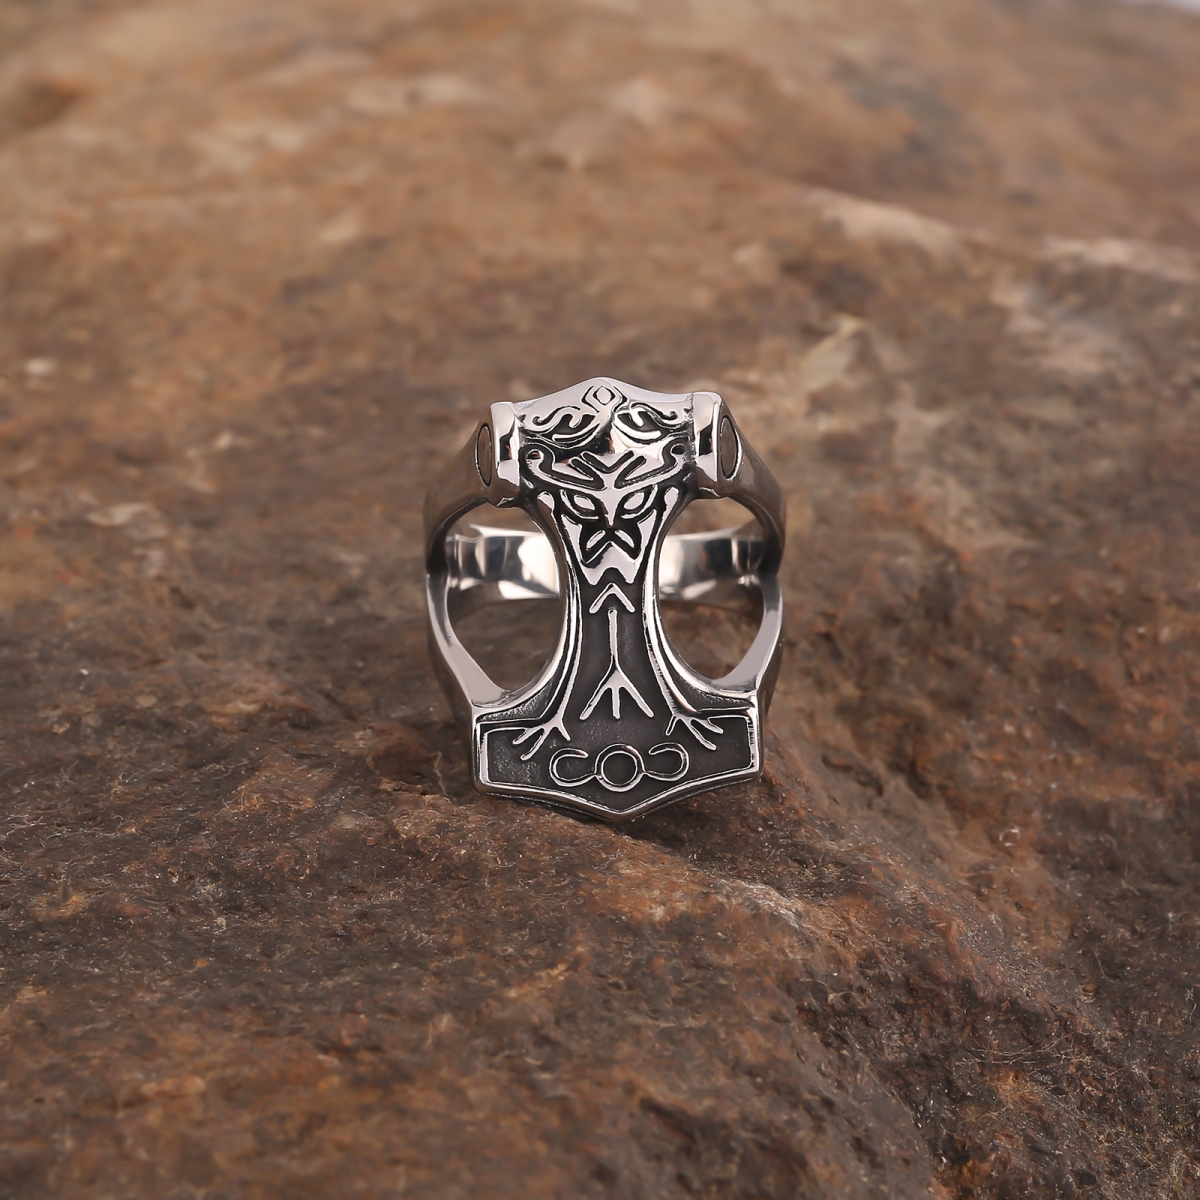 Where to buy viking jewelry-NORSECOLLECTION- Viking Jewelry,Viking Necklace,Viking Bracelet,Viking Rings,Viking Mugs,Viking Accessories,Viking Crafts